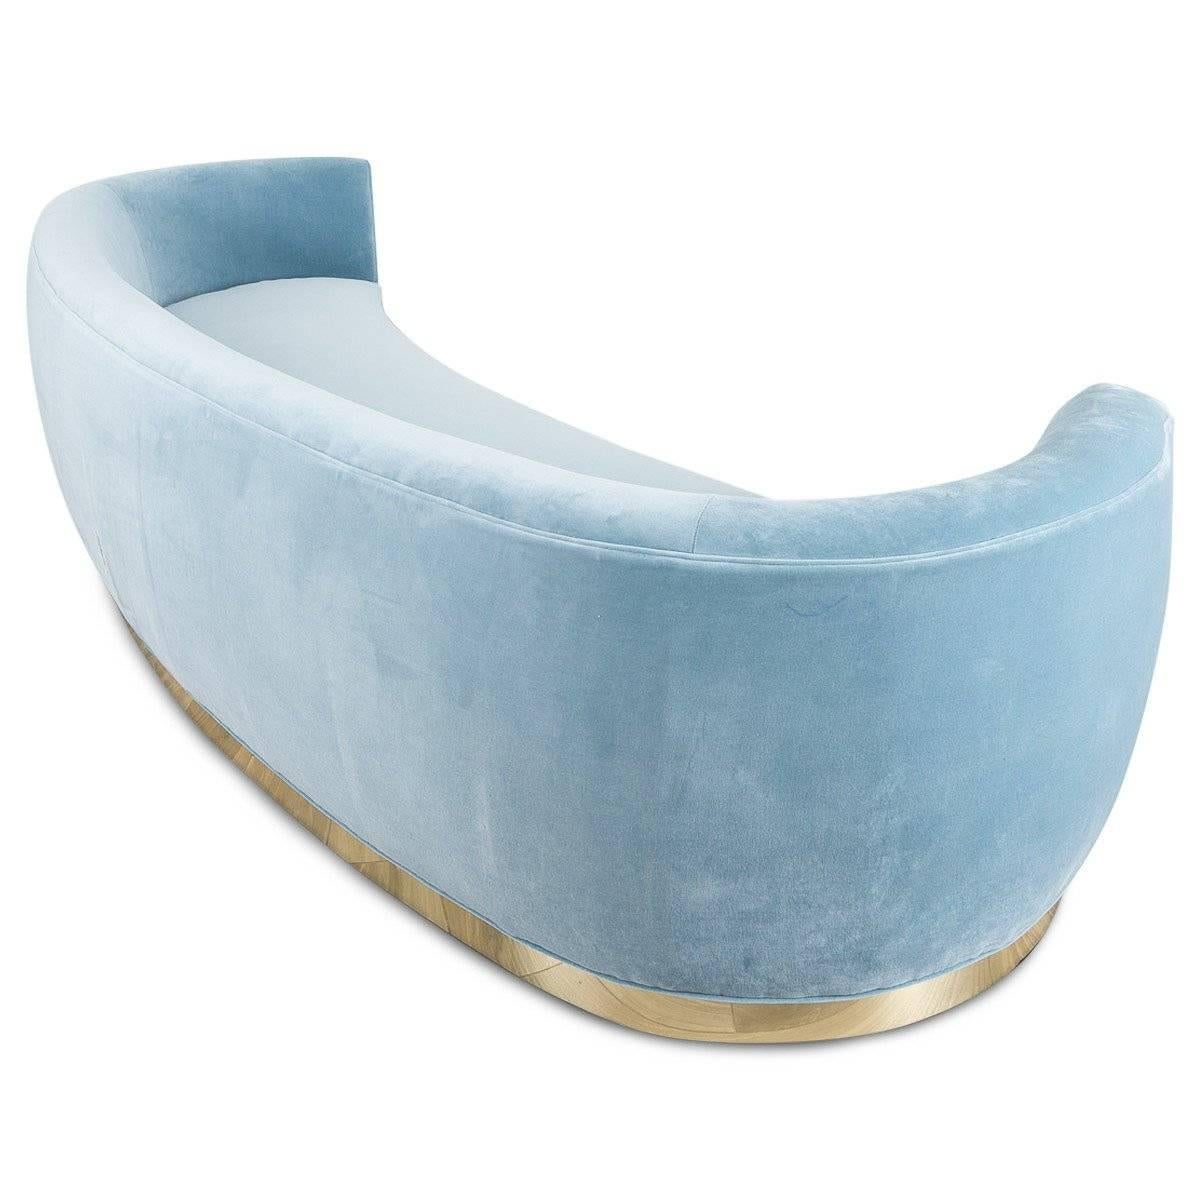 Mid-Century Modern Art Deco Style Curved Sofa in Velvet Upholstery with Brass Toe-kick Base 10 foot For Sale